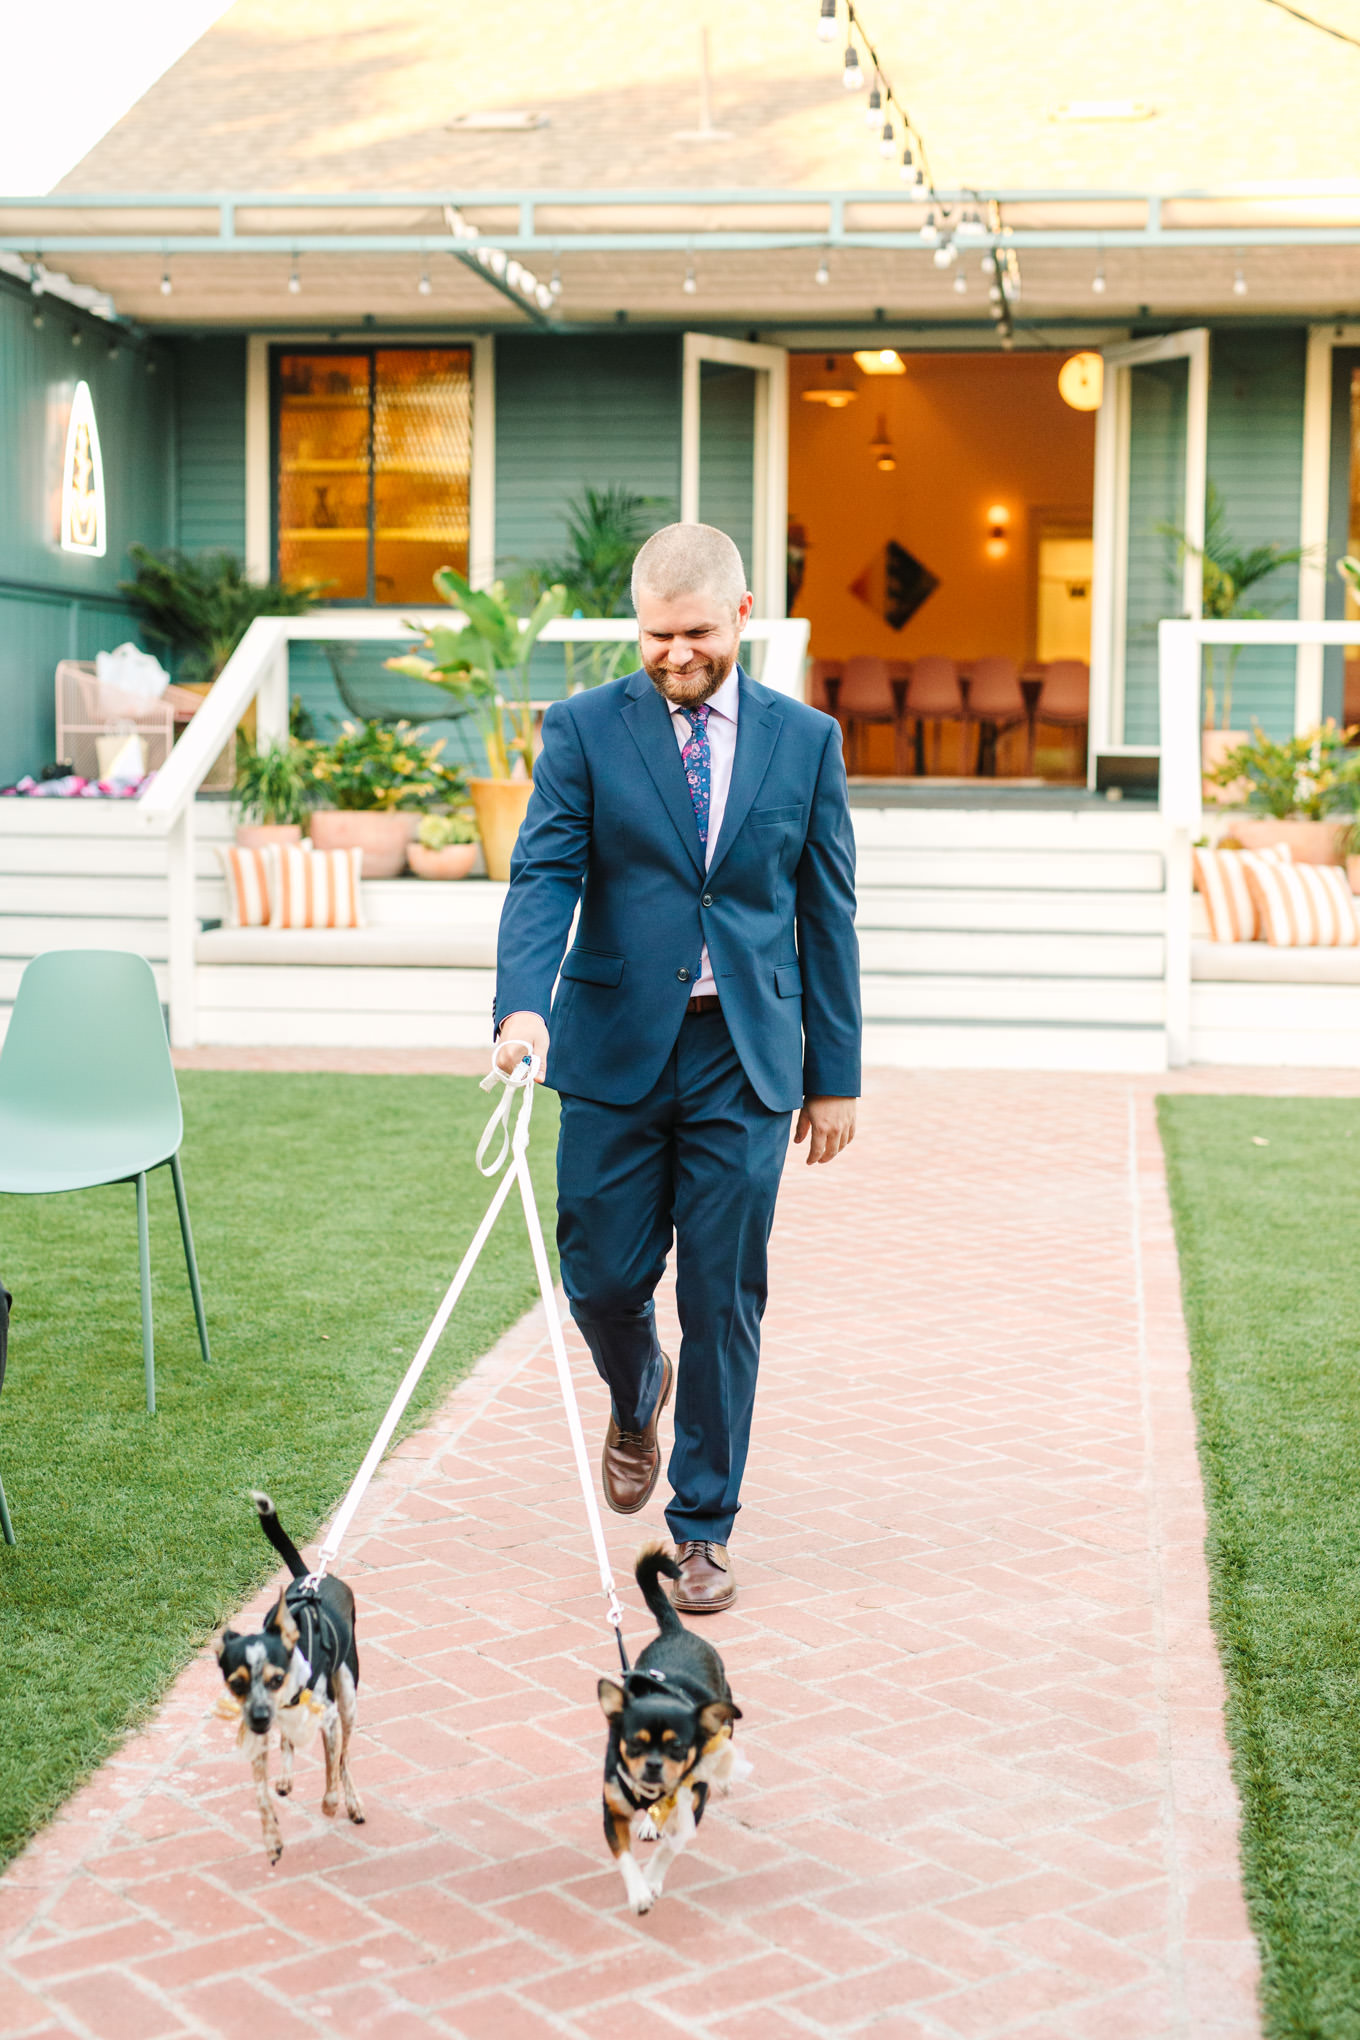 Best man walking down puppies to wedding ceremony | Colorful pop-up micro wedding at The Ruby Street Los Angeles featured on Green Wedding Shoes | Colorful and elevated photography for fun-loving couples in Southern California | #colorfulwedding #popupwedding #weddingphotography #microwedding Source: Mary Costa Photography | Los Angeles